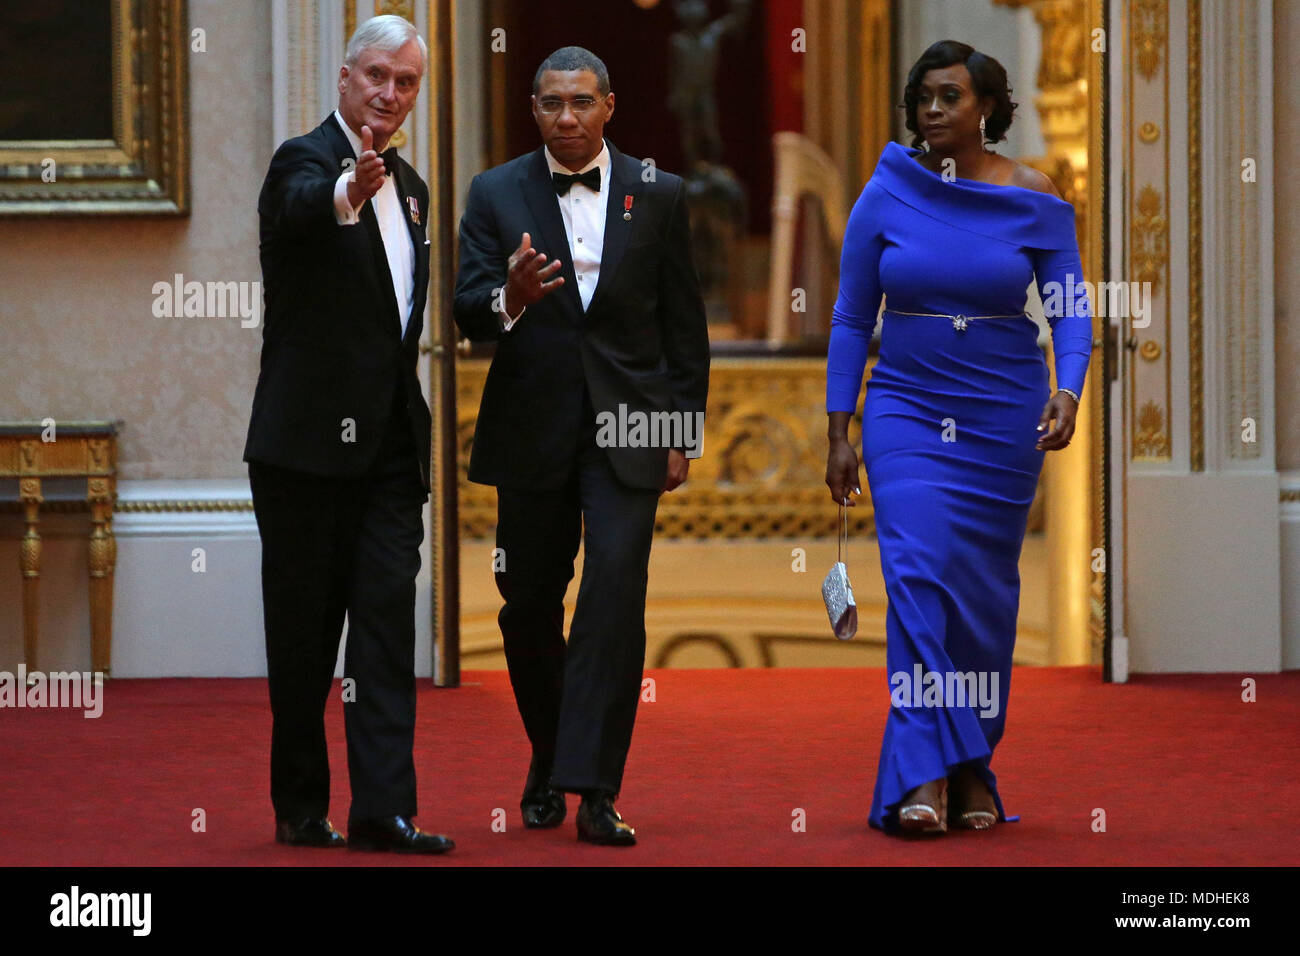 Jamaica's Prime Minister Andrew Holness (centre) and his wife Juliet arrive in the East Gallery at Buckingham Palace in London as Queen Elizabeth II hosts a dinner during the Commonwealth Heads of Government Meeting. Stock Photo